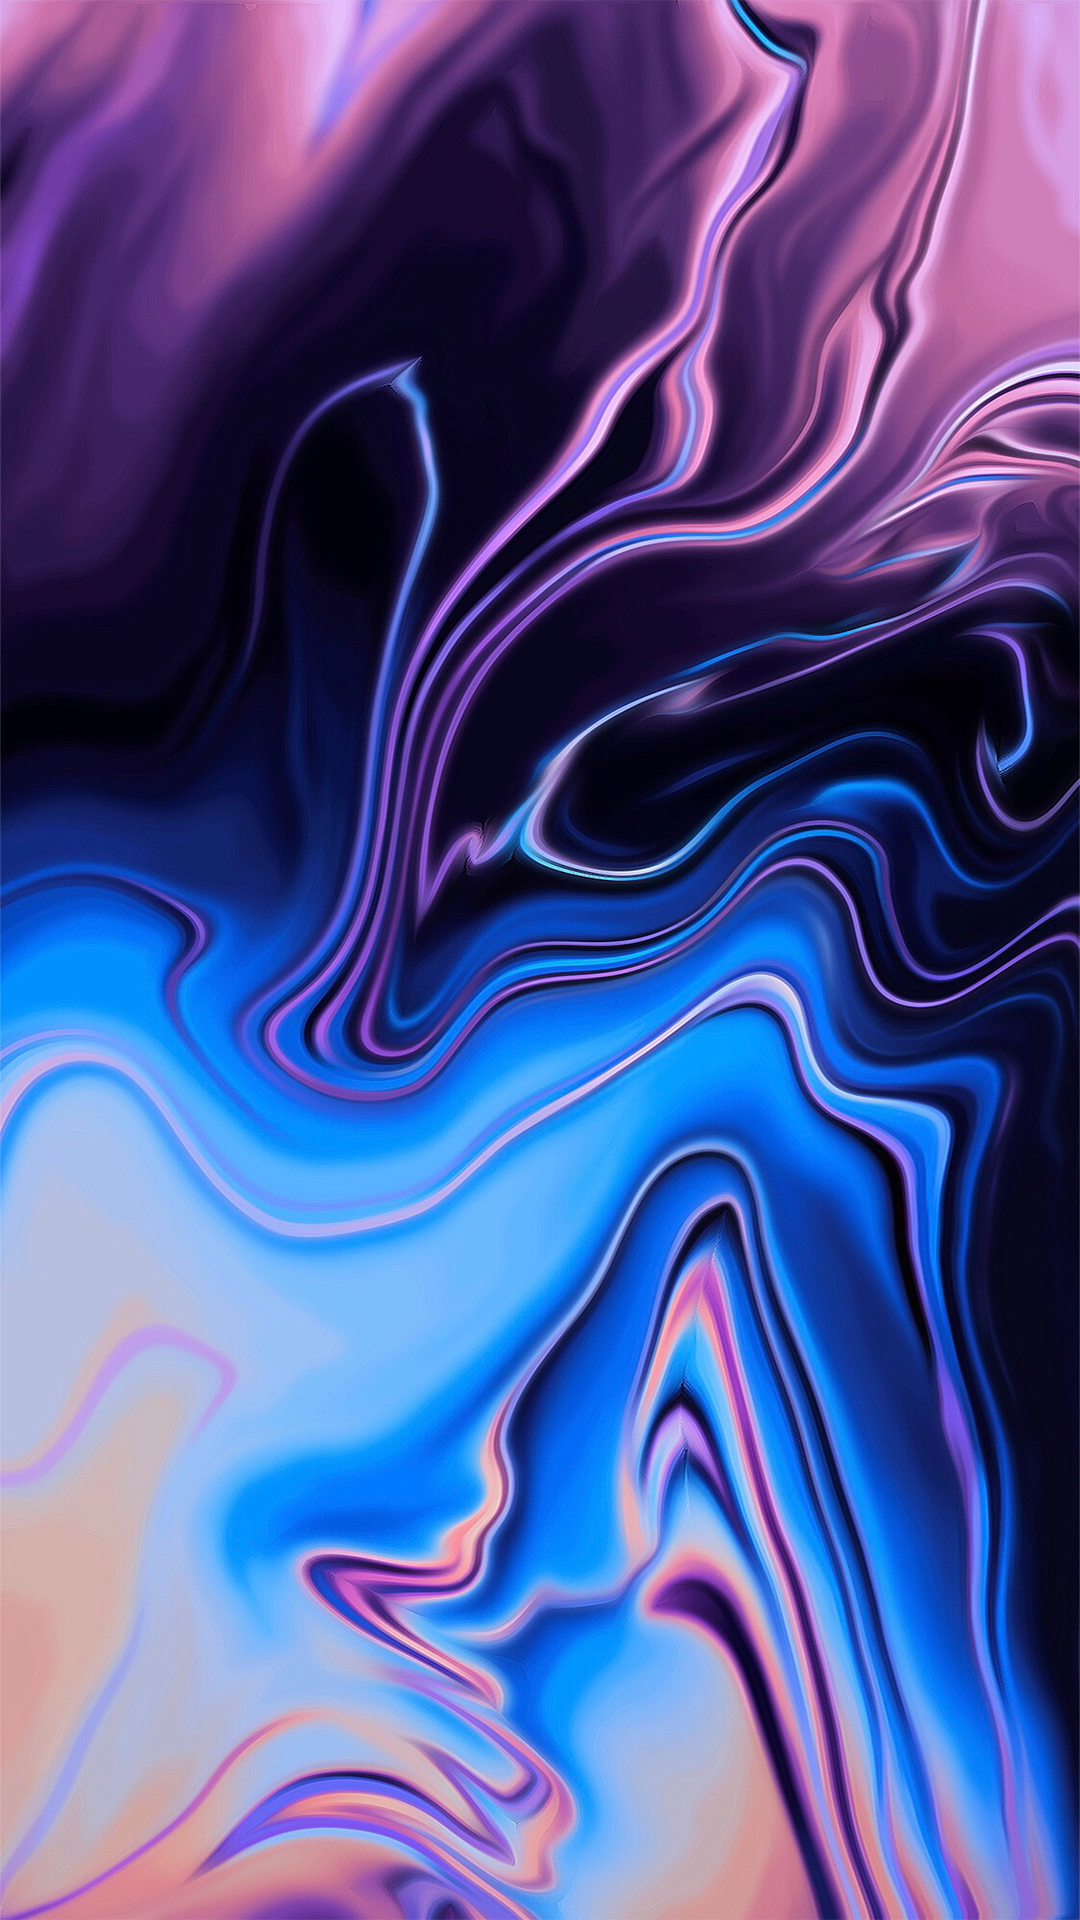 New MacBook Pro inspired wallpapers for iPhone 1080x1920